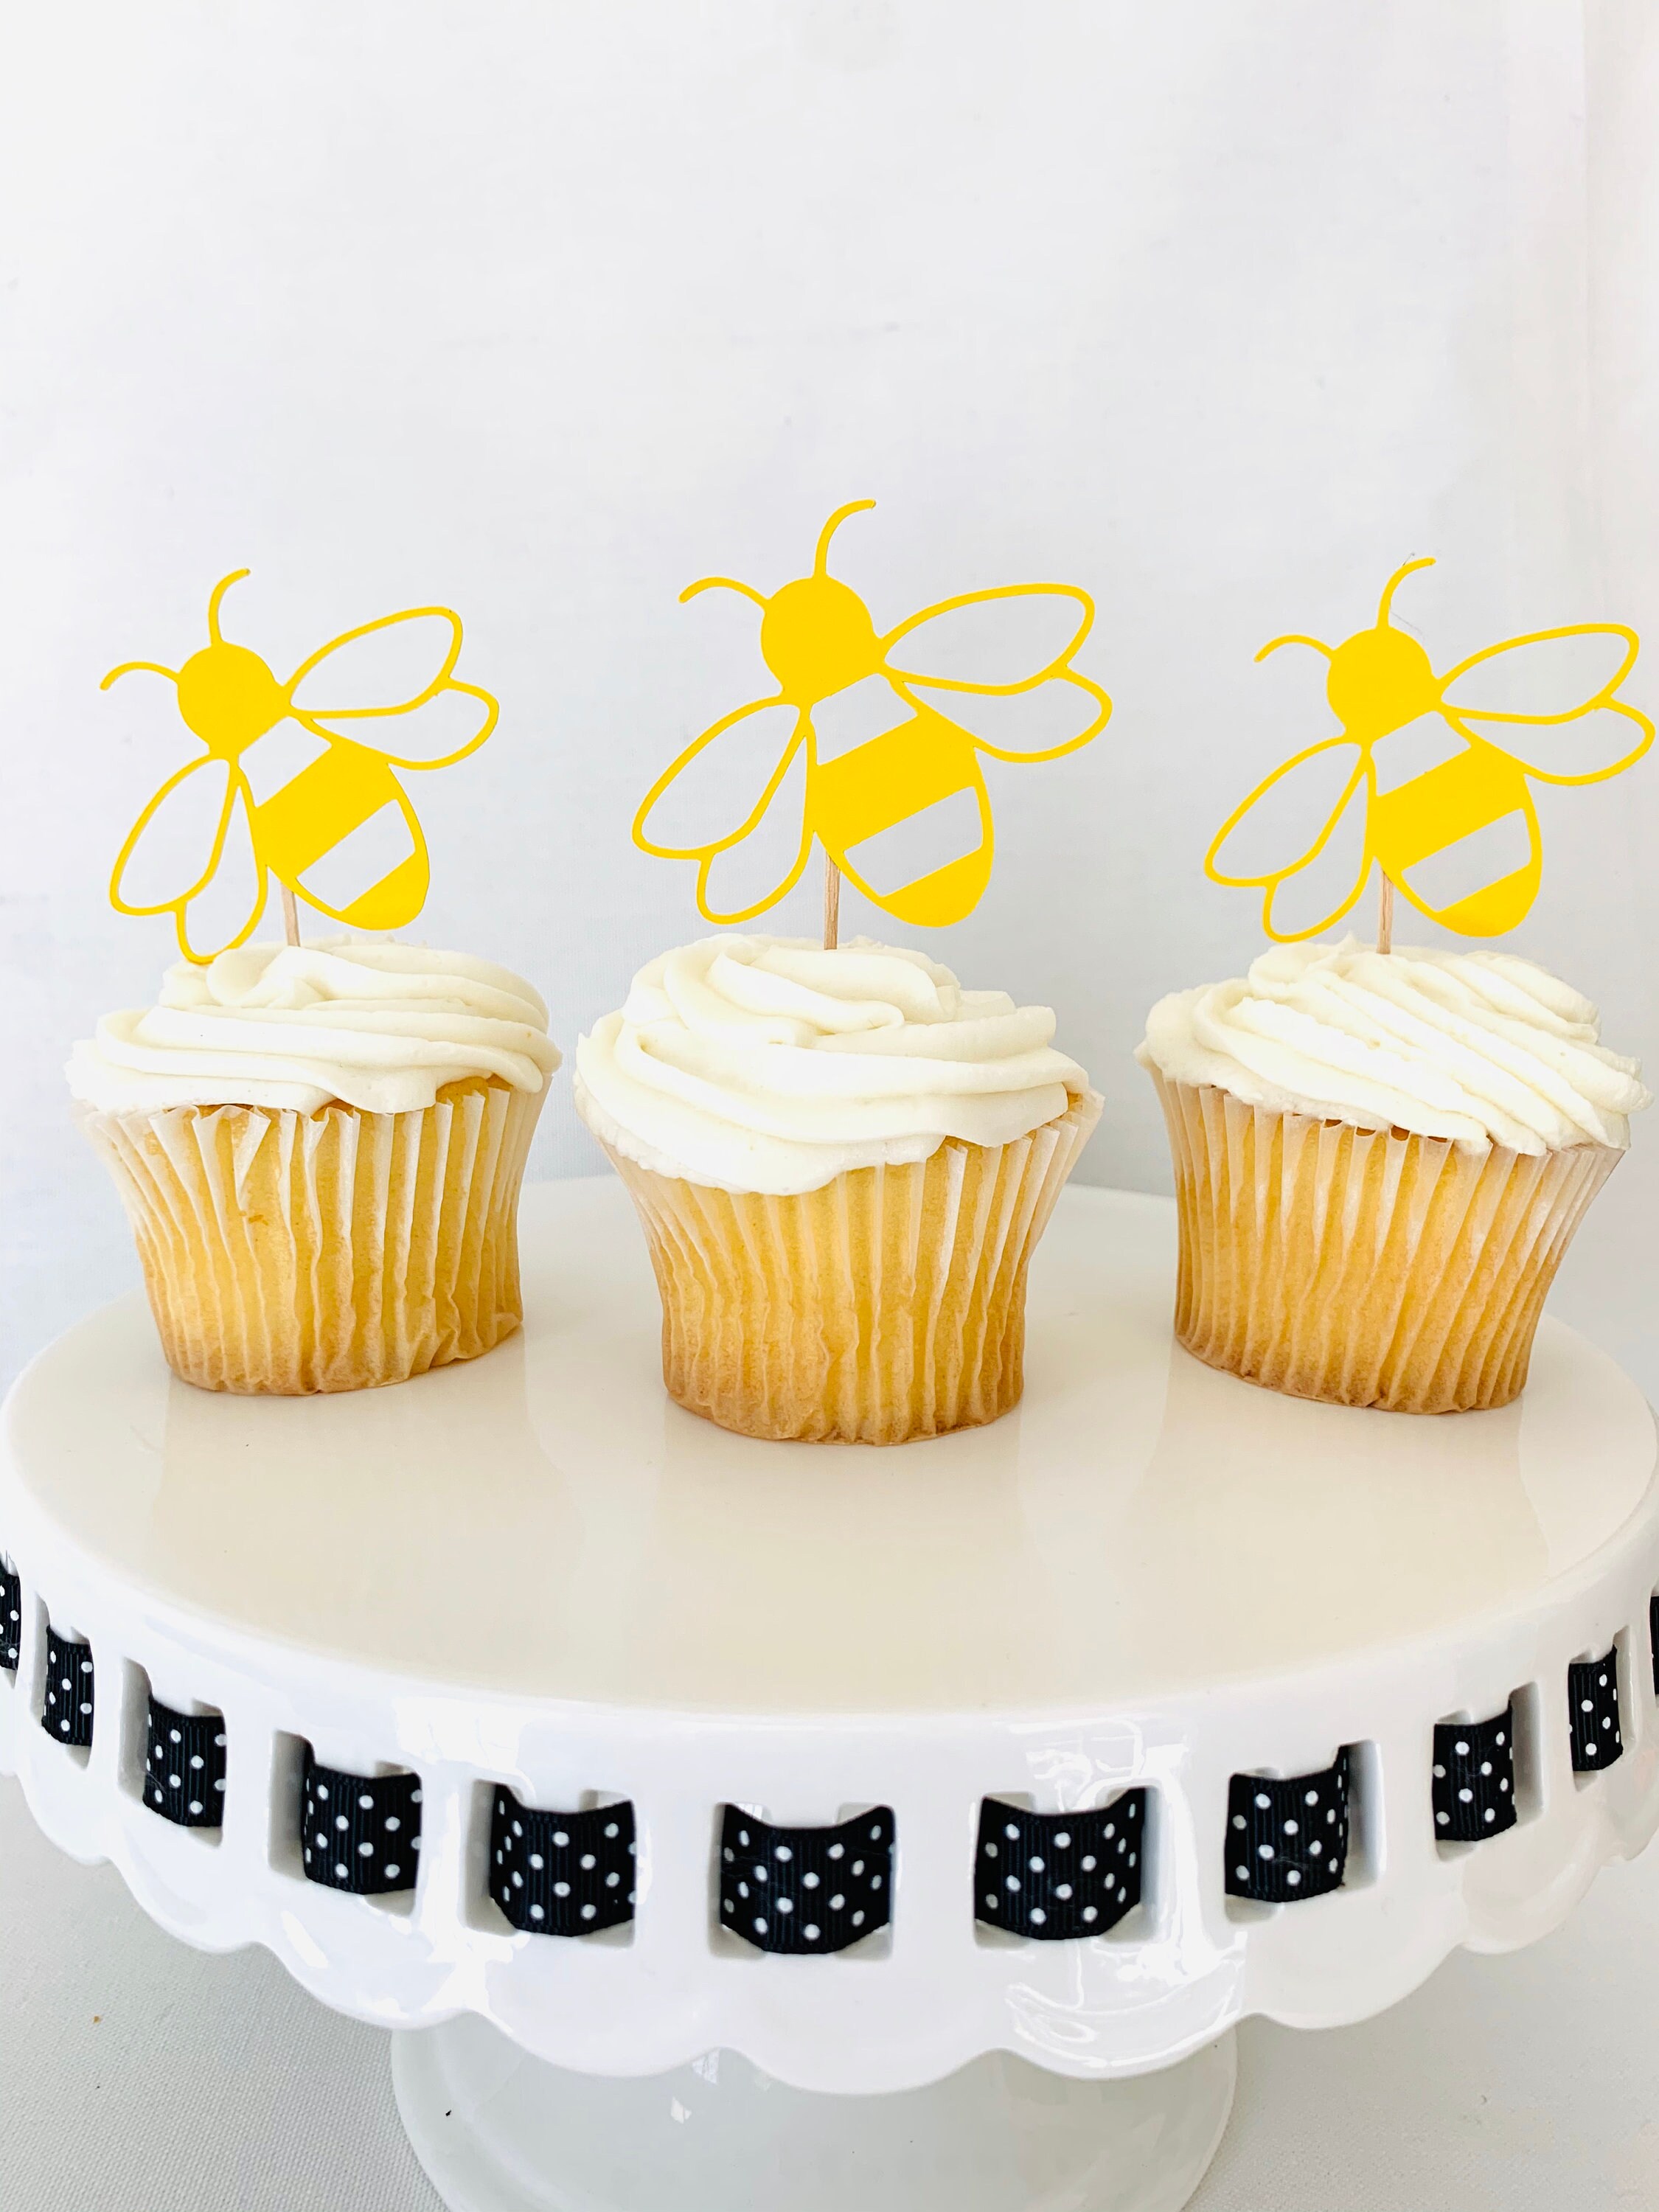 24 BUMBLE BEE EDIBLE Sugar Cupcake or Cake Toppers by Decopac Bee  Decorations for Party Desserts, Birthdays, Spring Themed Party 